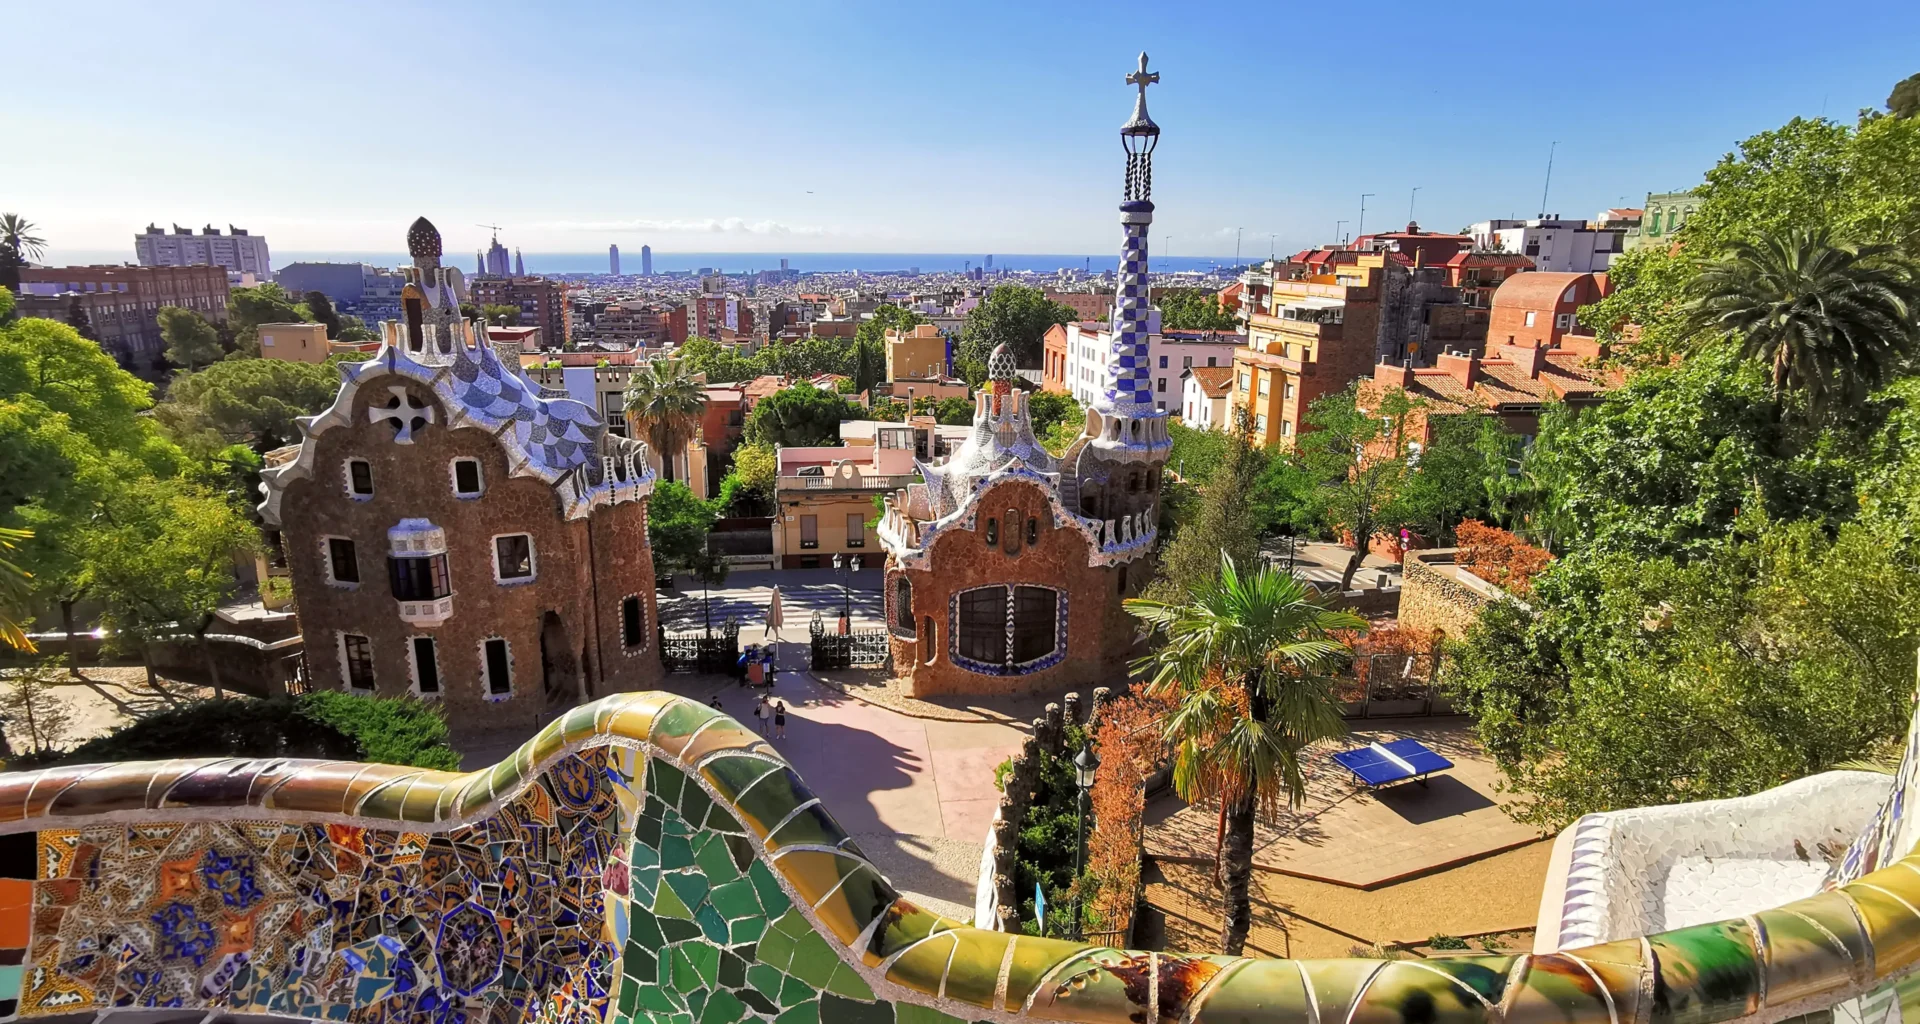 itineraire visiter barcelone 2 3 4 5 jours